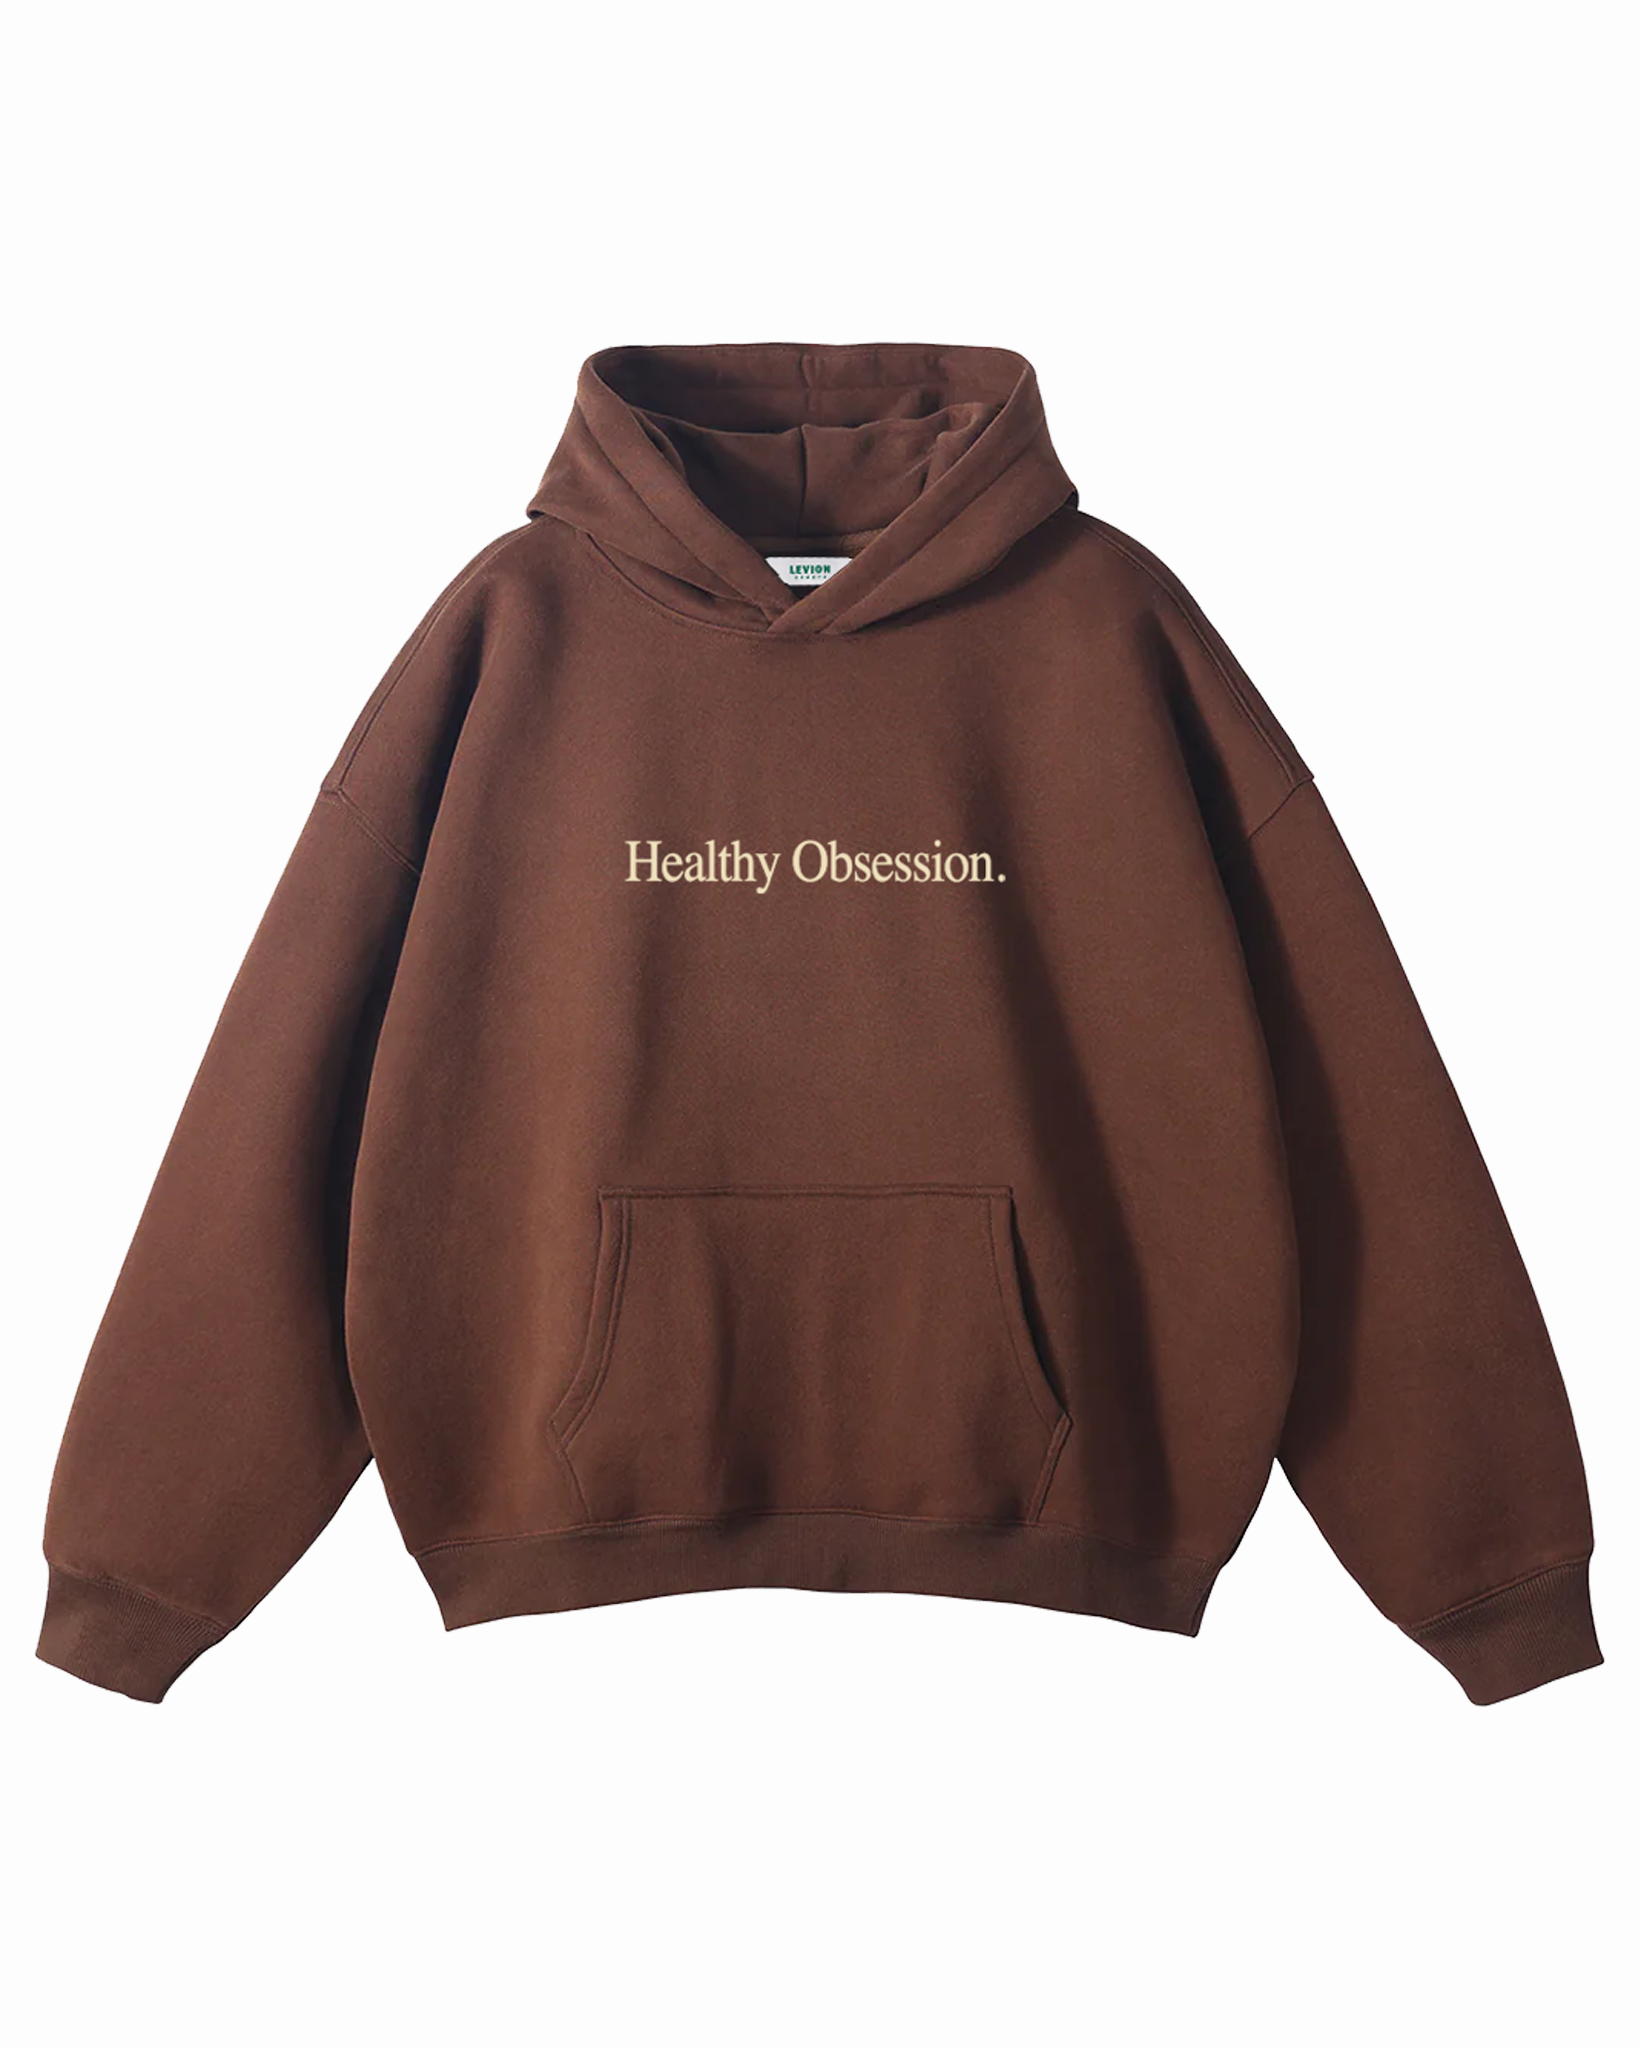 Healthy Obsession Hoodie Chocolate